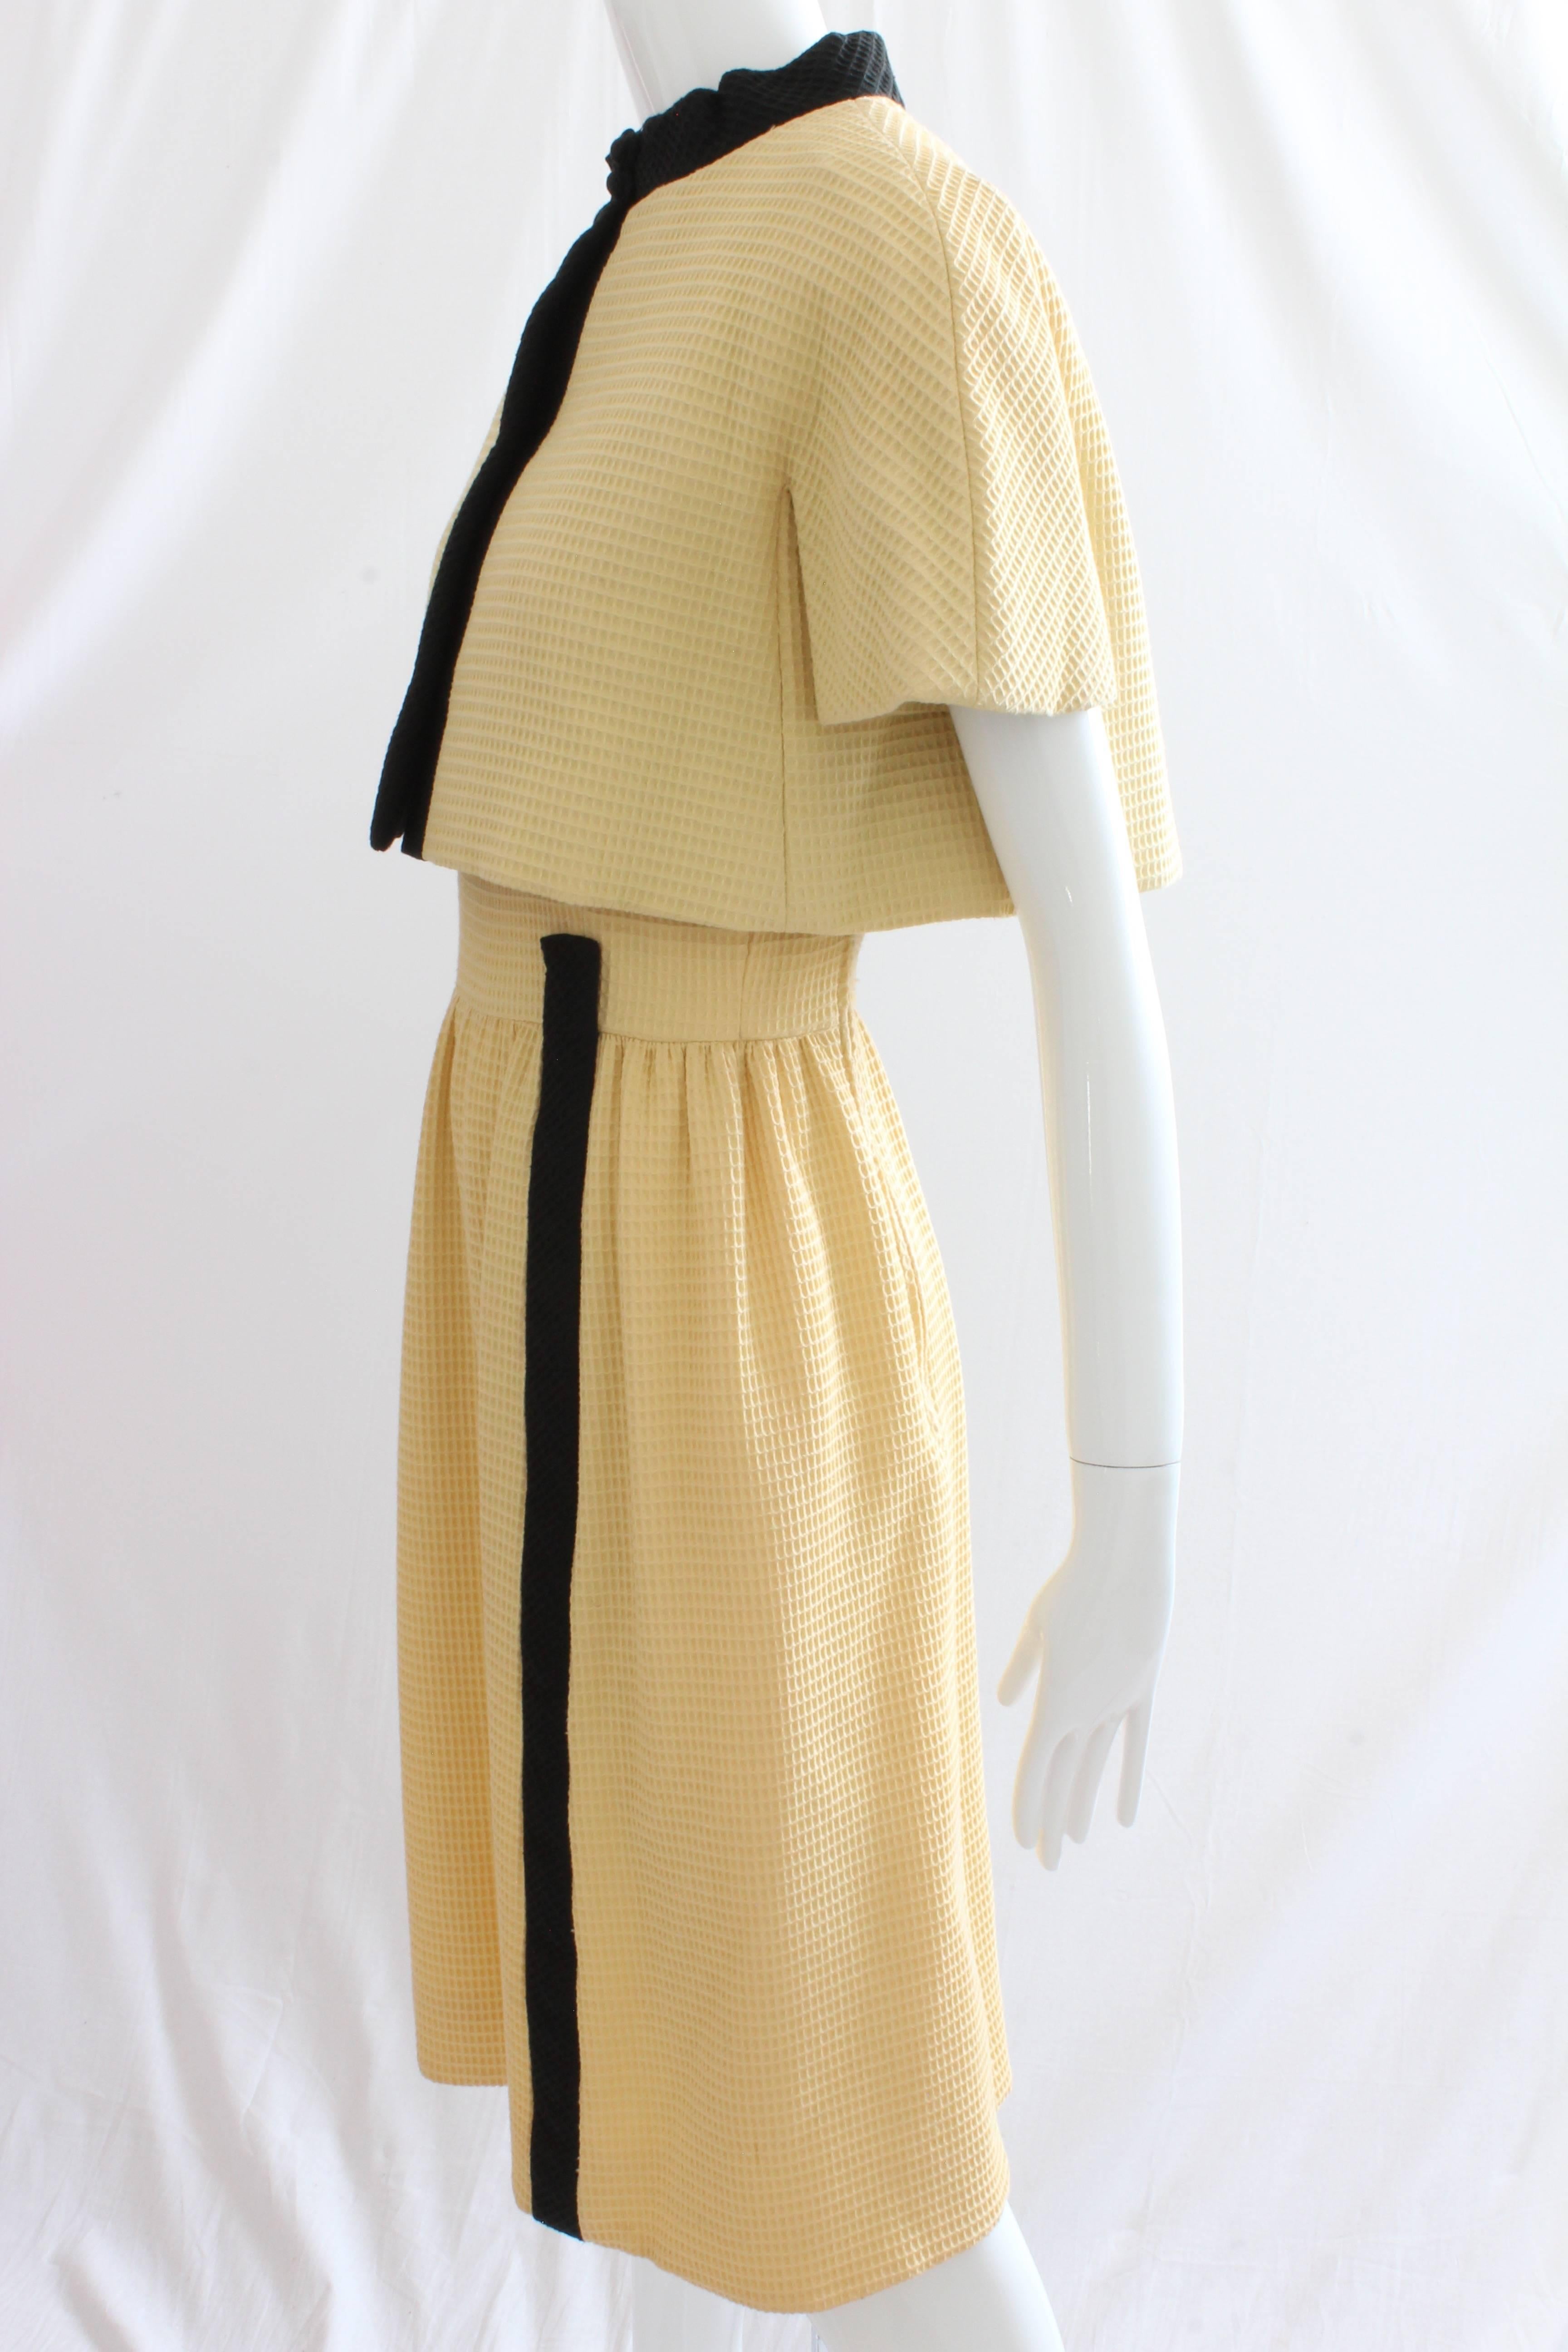 Beige 60s Chester Weinberg Jacket and Dress Ensemble 2pc Set Yellow Honeycomb Fabric S